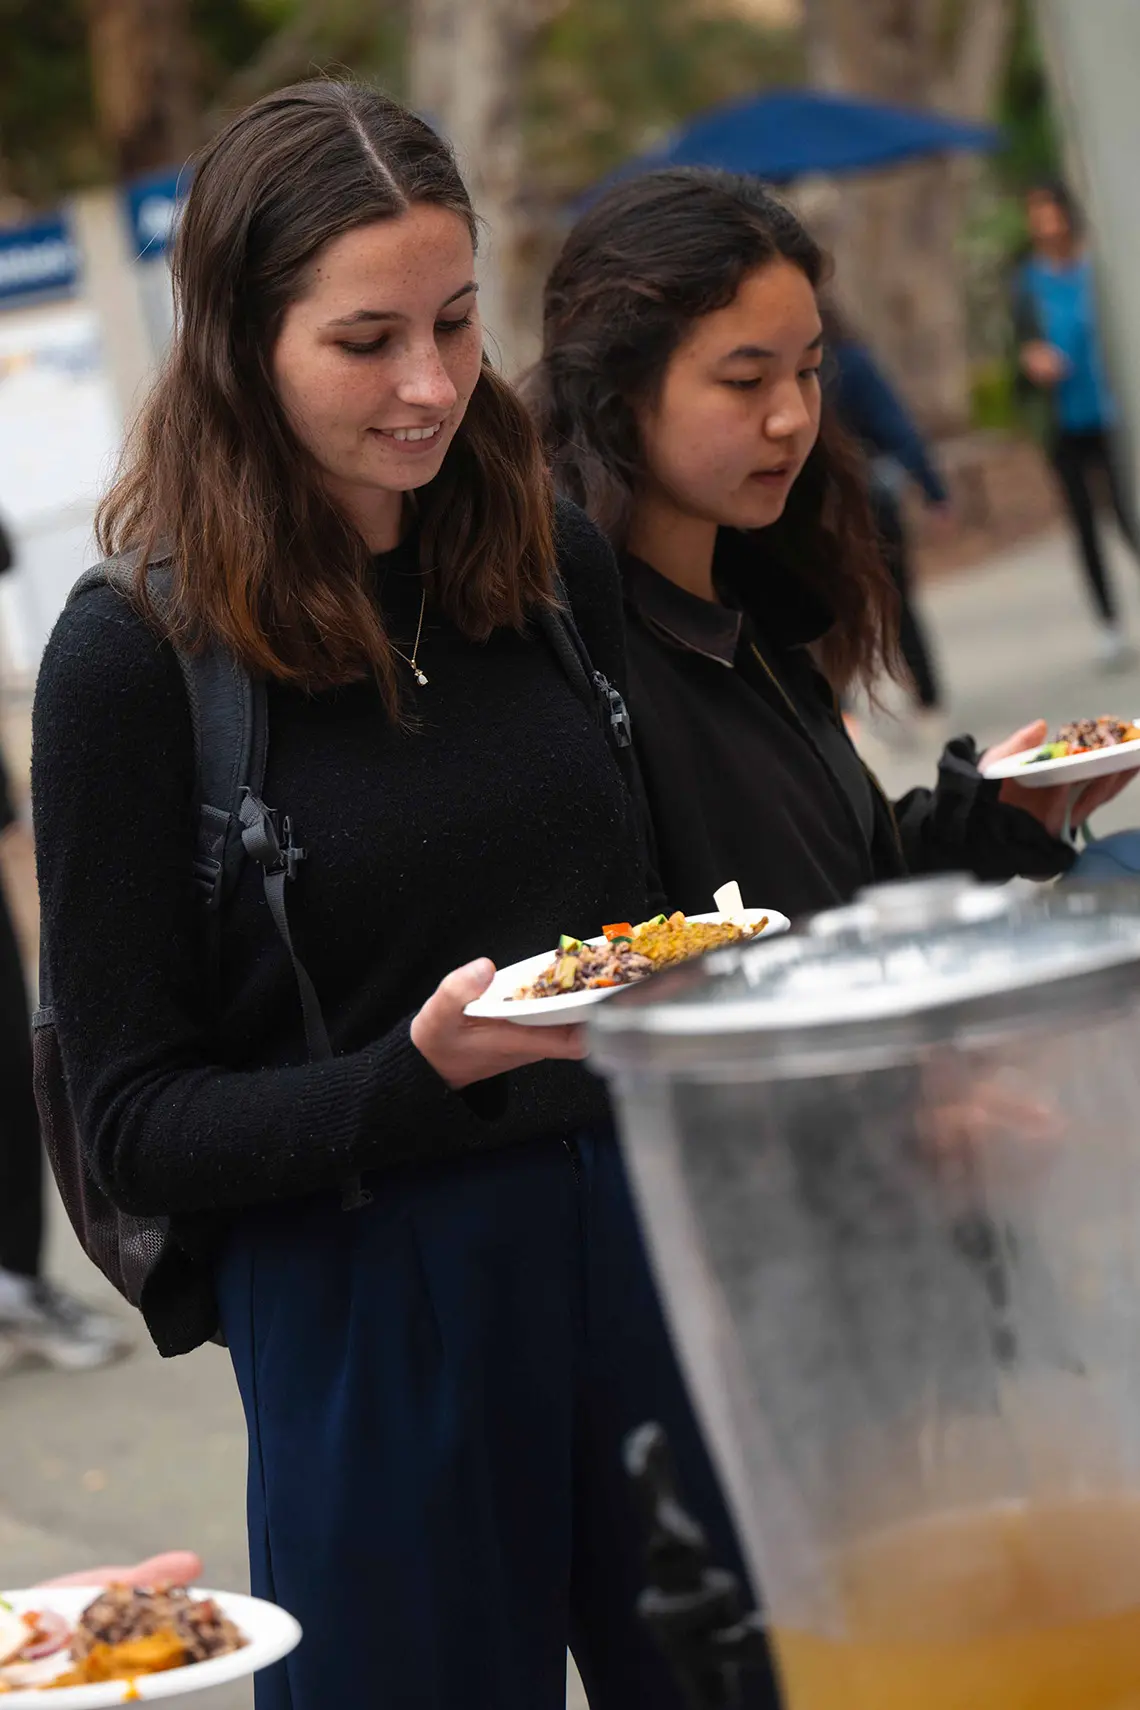 Students hold plates of food